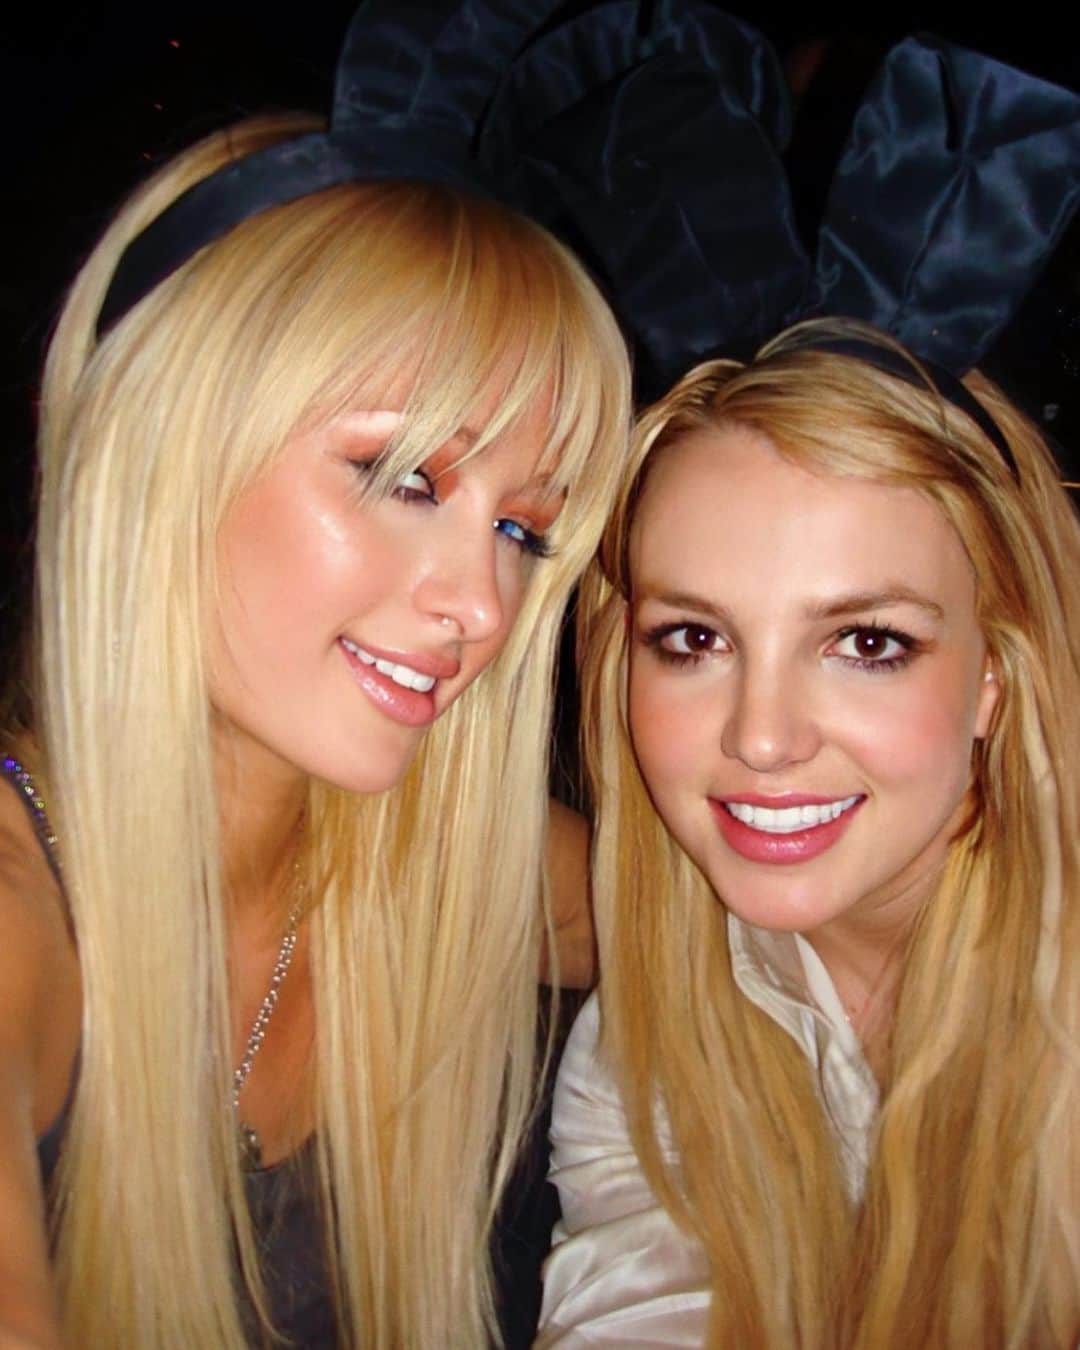 Blonde Saladのインスタグラム：「This photo answers the question who invented the selfie? 🤳✨ In November 2006, during a party, Paris Hilton grabs a cellphone, aims it at herself in front of the camera, and takes a memorable photo with Britney Spears: the so-called selfie, a gesture that has become commonplace in recent years with the proliferation of increasingly advanced devices. According to the American heiress, she asserts that she invented it that night along with her friend. «17 years ago, Britney and I created the selfie! Tag me in your most epic selfies to celebrate the most iconic invention», she said in her Instagram caption.  #ParisHilton #BritneySpears #Selfie #00s #Icons #Paris #Britney #TheBlondeSalad」